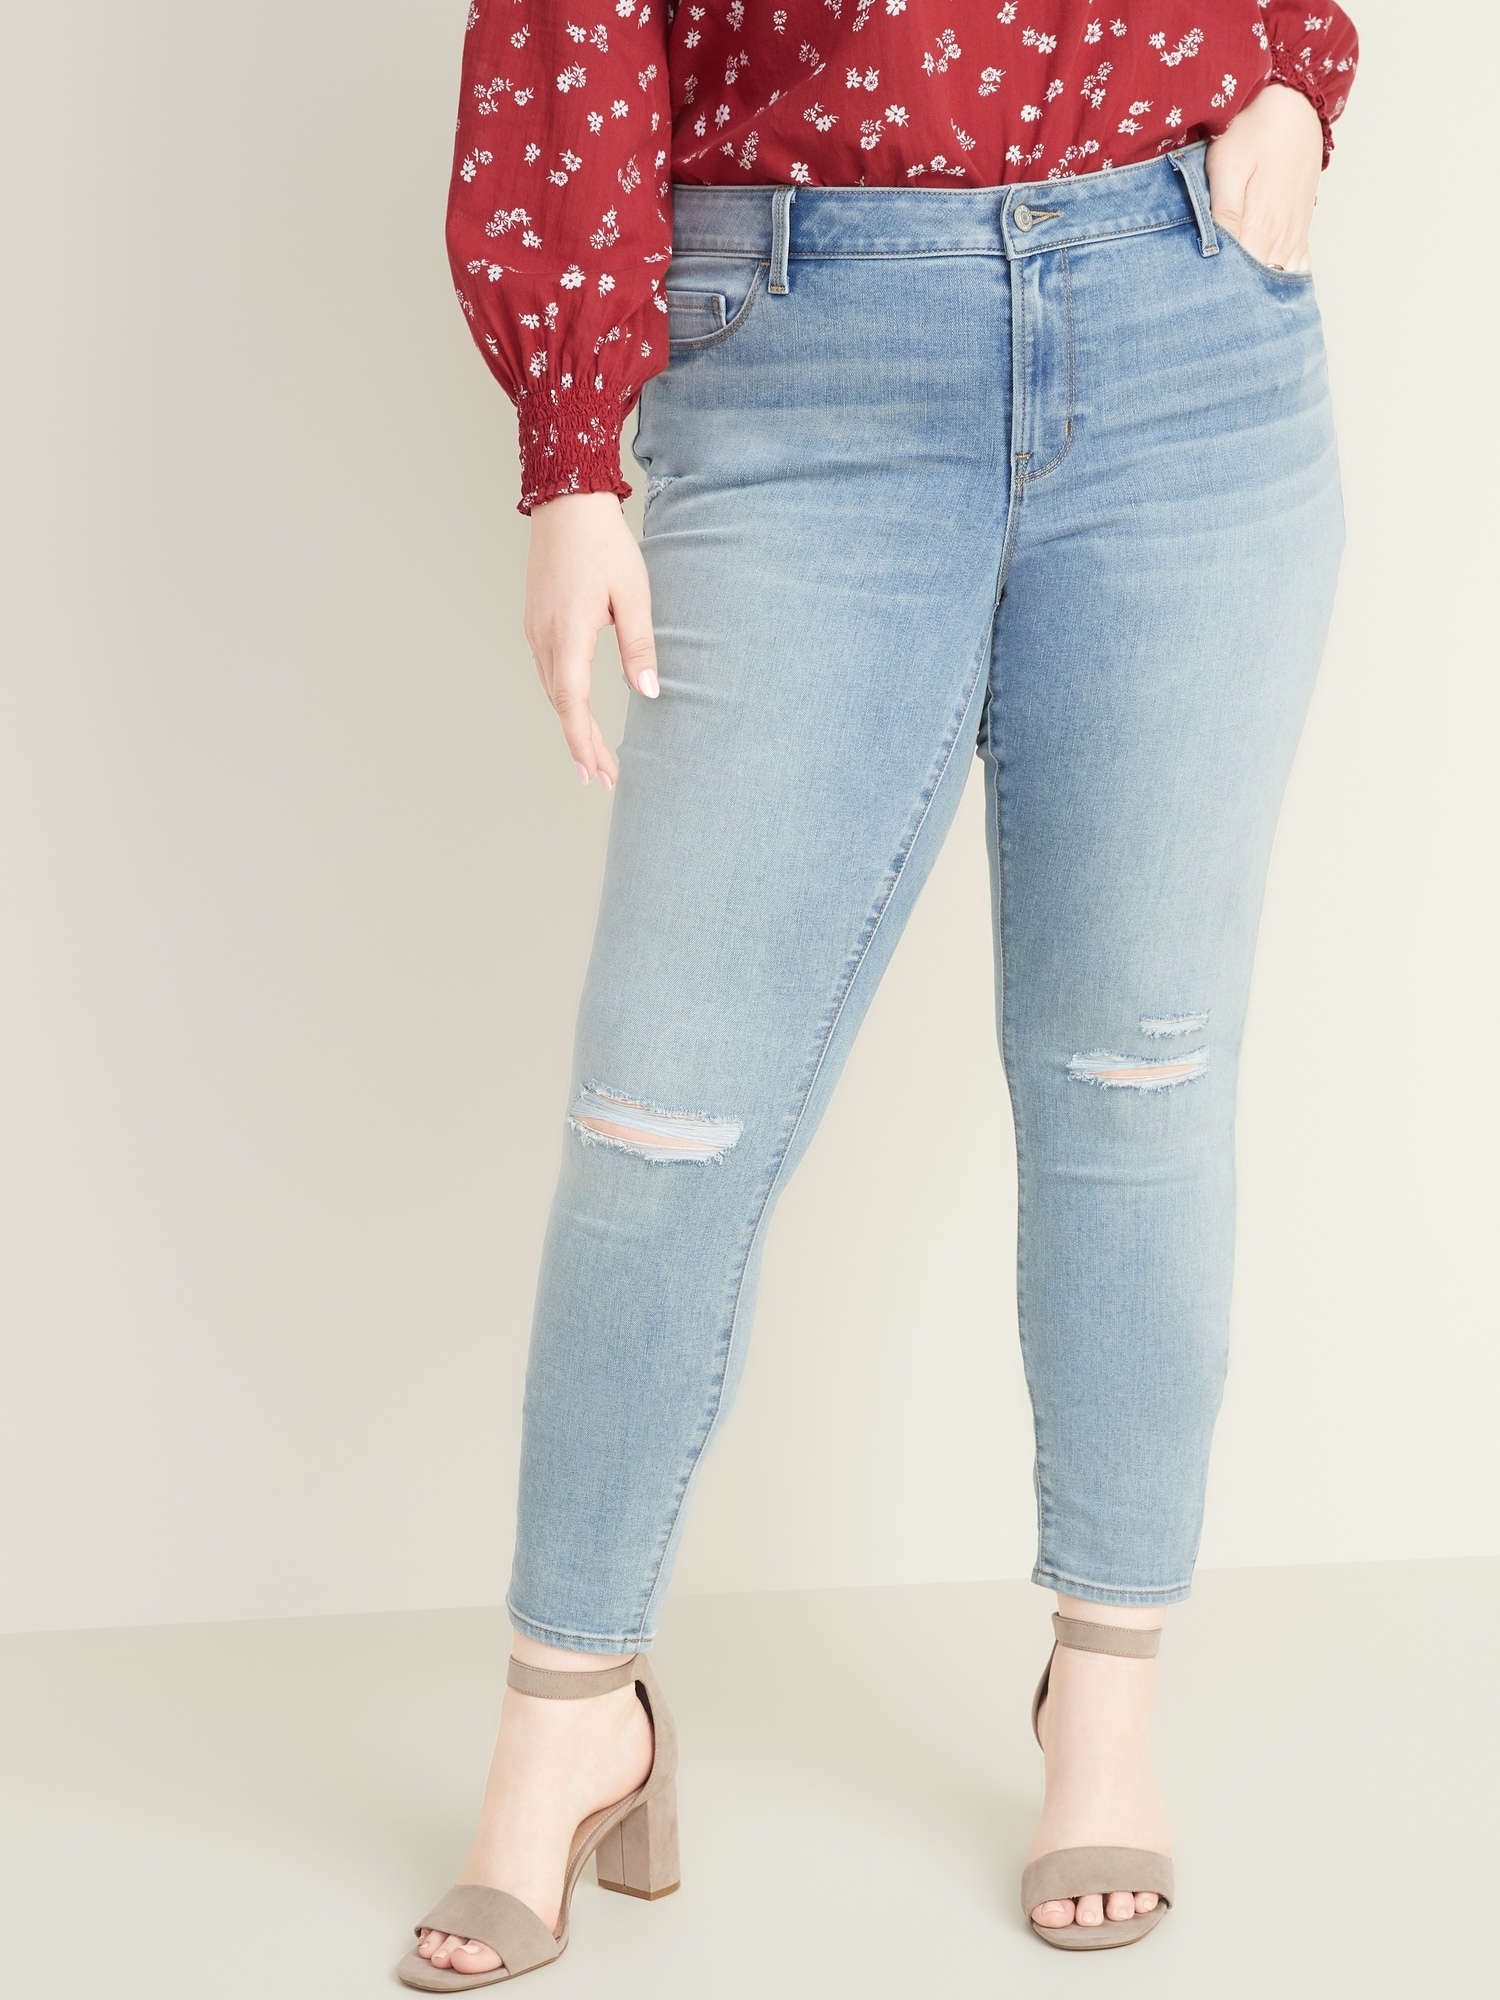 distressed jeans old navy